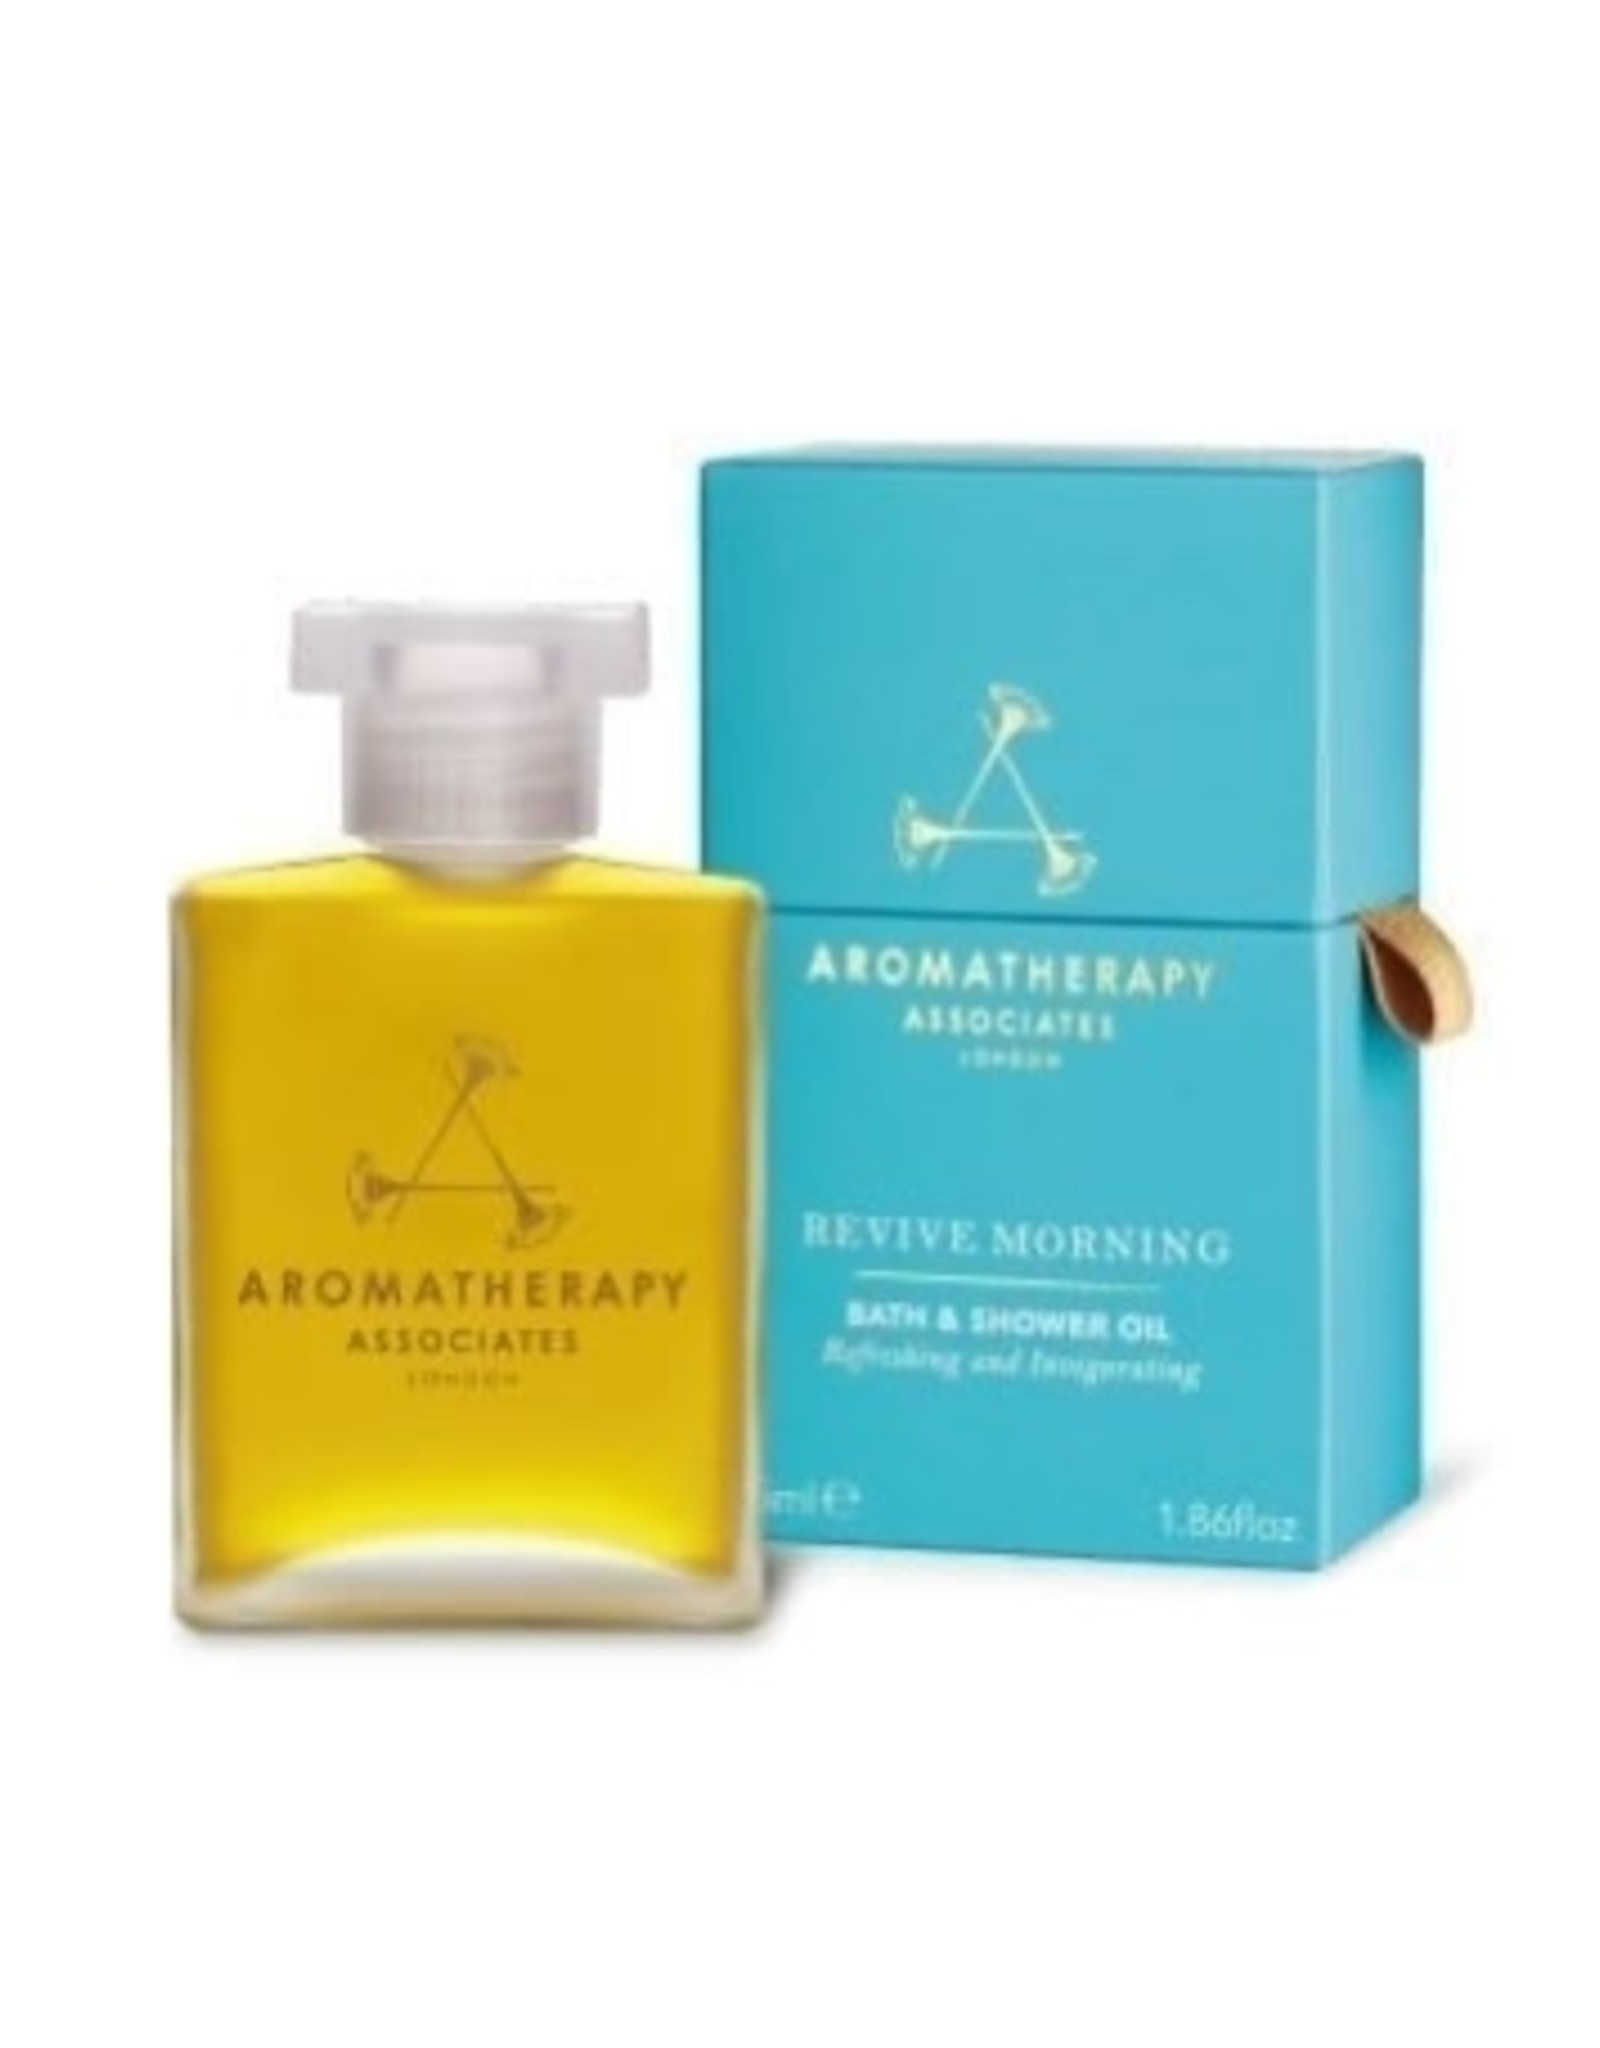 Aromatherapy Revive Morning Bath and Shower Oil, 55ml